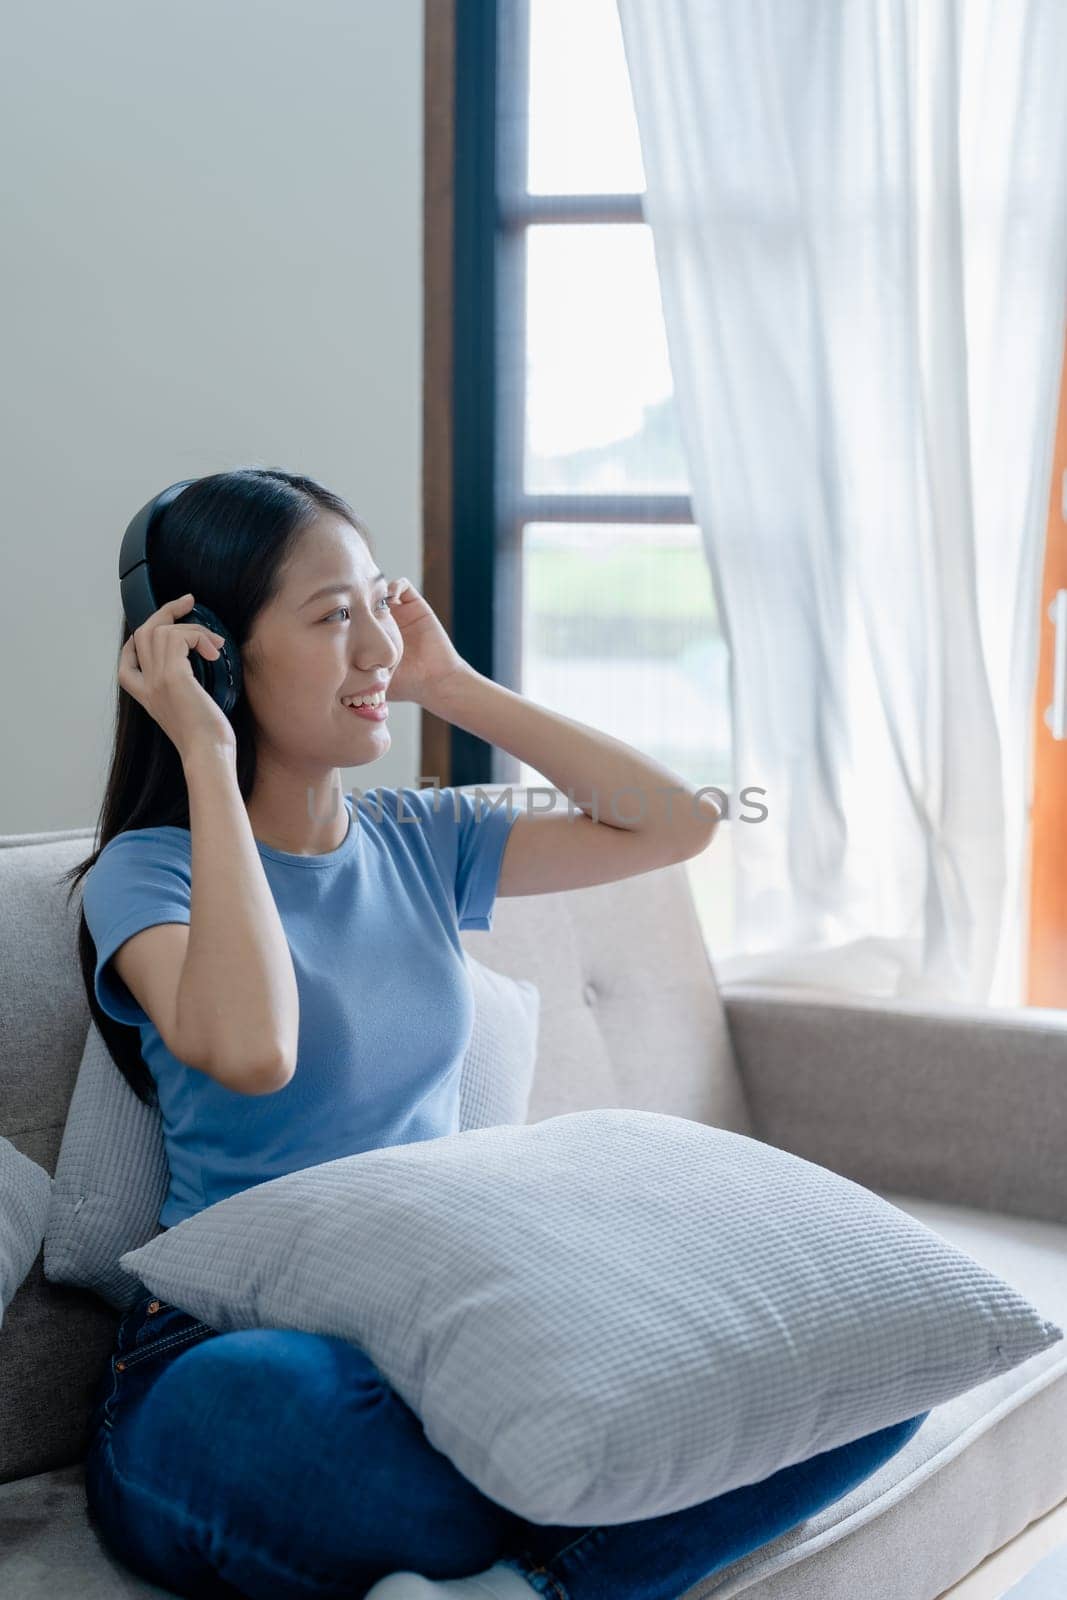 Peaceful girl in modern wireless headphones sit relax on comfortable couch listening to music, on cozy sofa, stress free concept